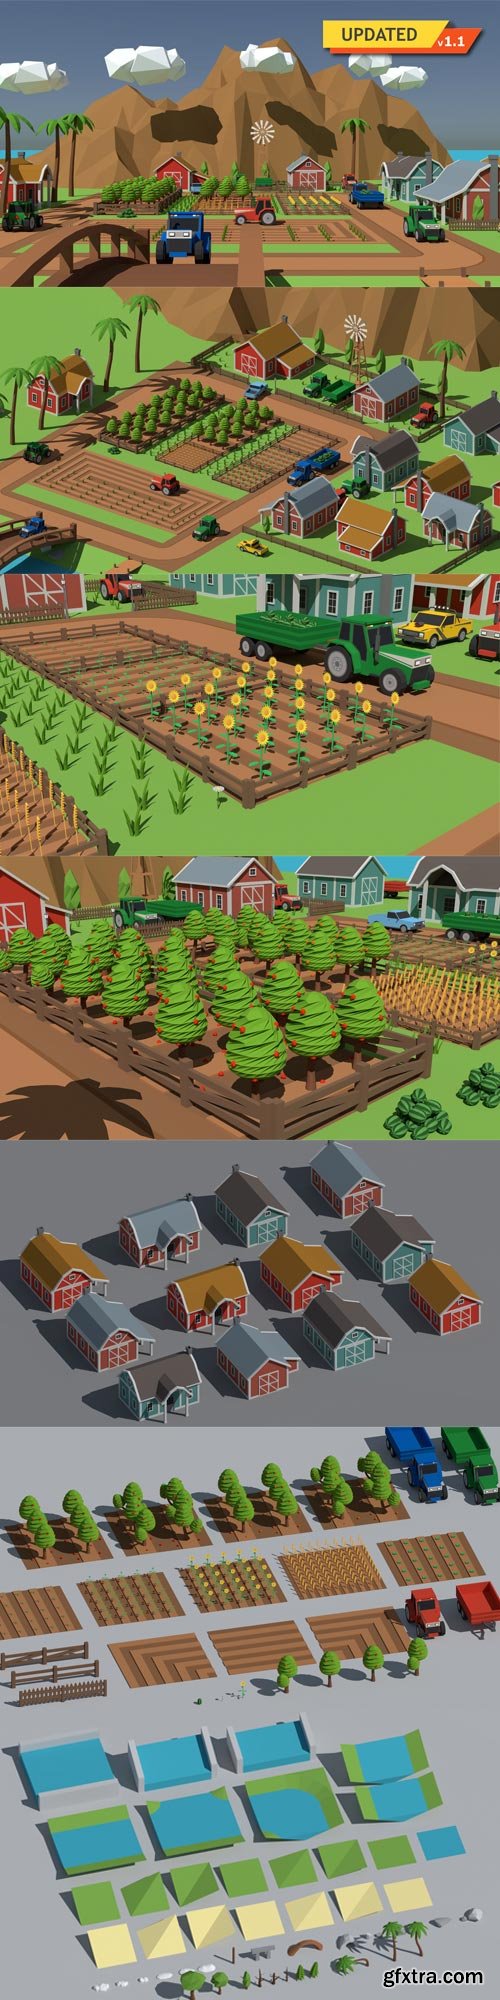 SimplePoly Farm - Low Poly Assets VR / AR / low-poly 3D model